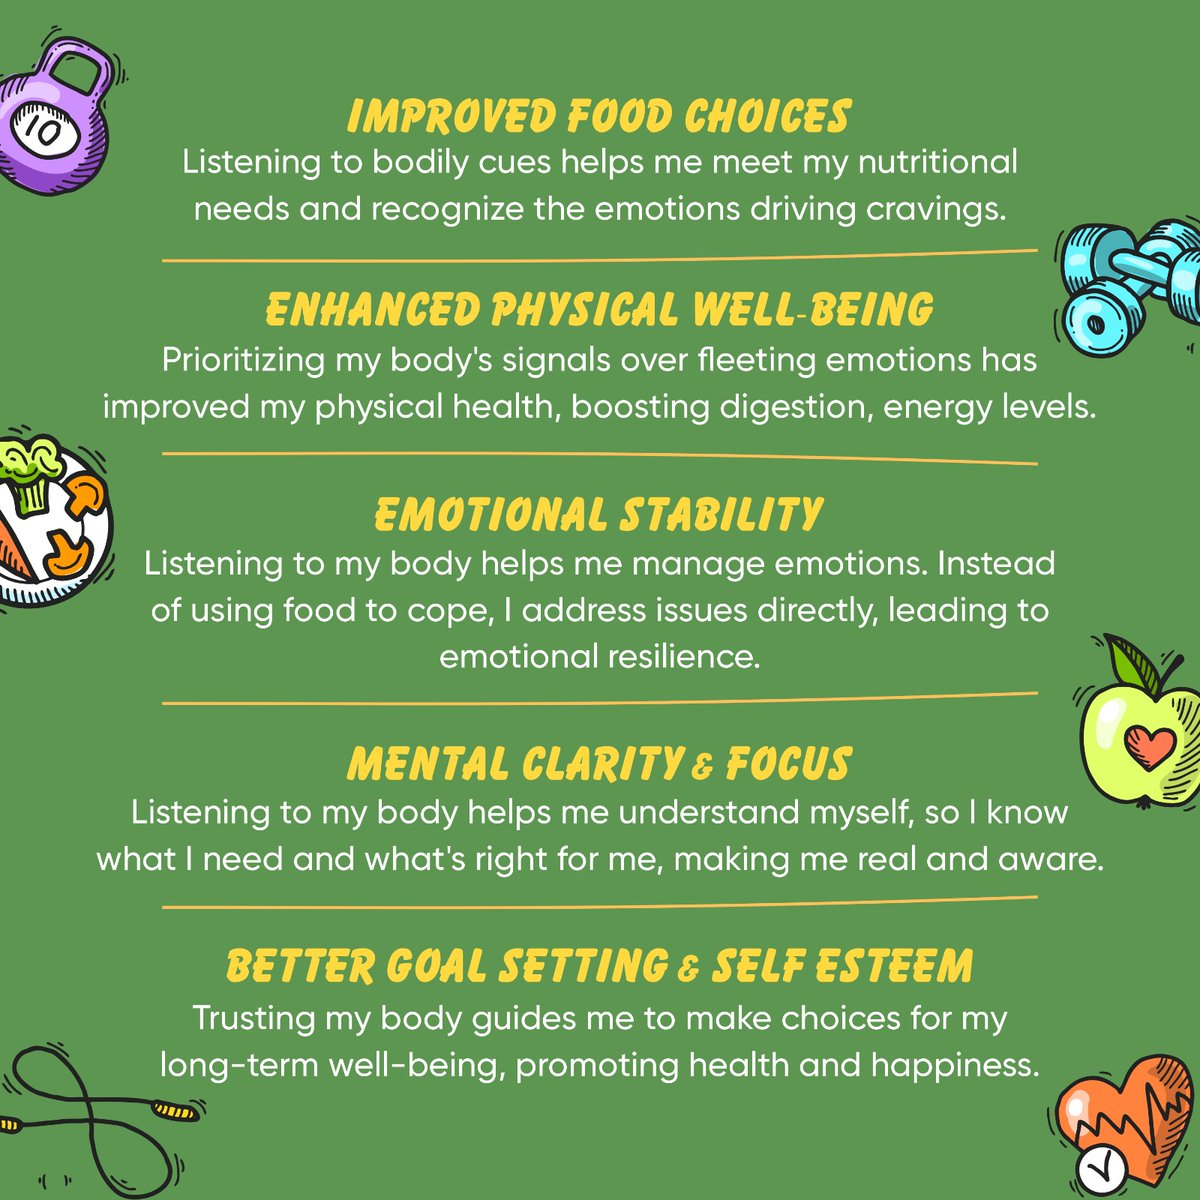 Pritha, our program manager, prioritizes her well-being by embracing micro-goals and mindful eating. Read from the link below to discover how this approach has transformed her daily routine and overall health. instagram.com/p/C50p8U7y39I/… #April #MentalHealthMatters #MindBodyMatters